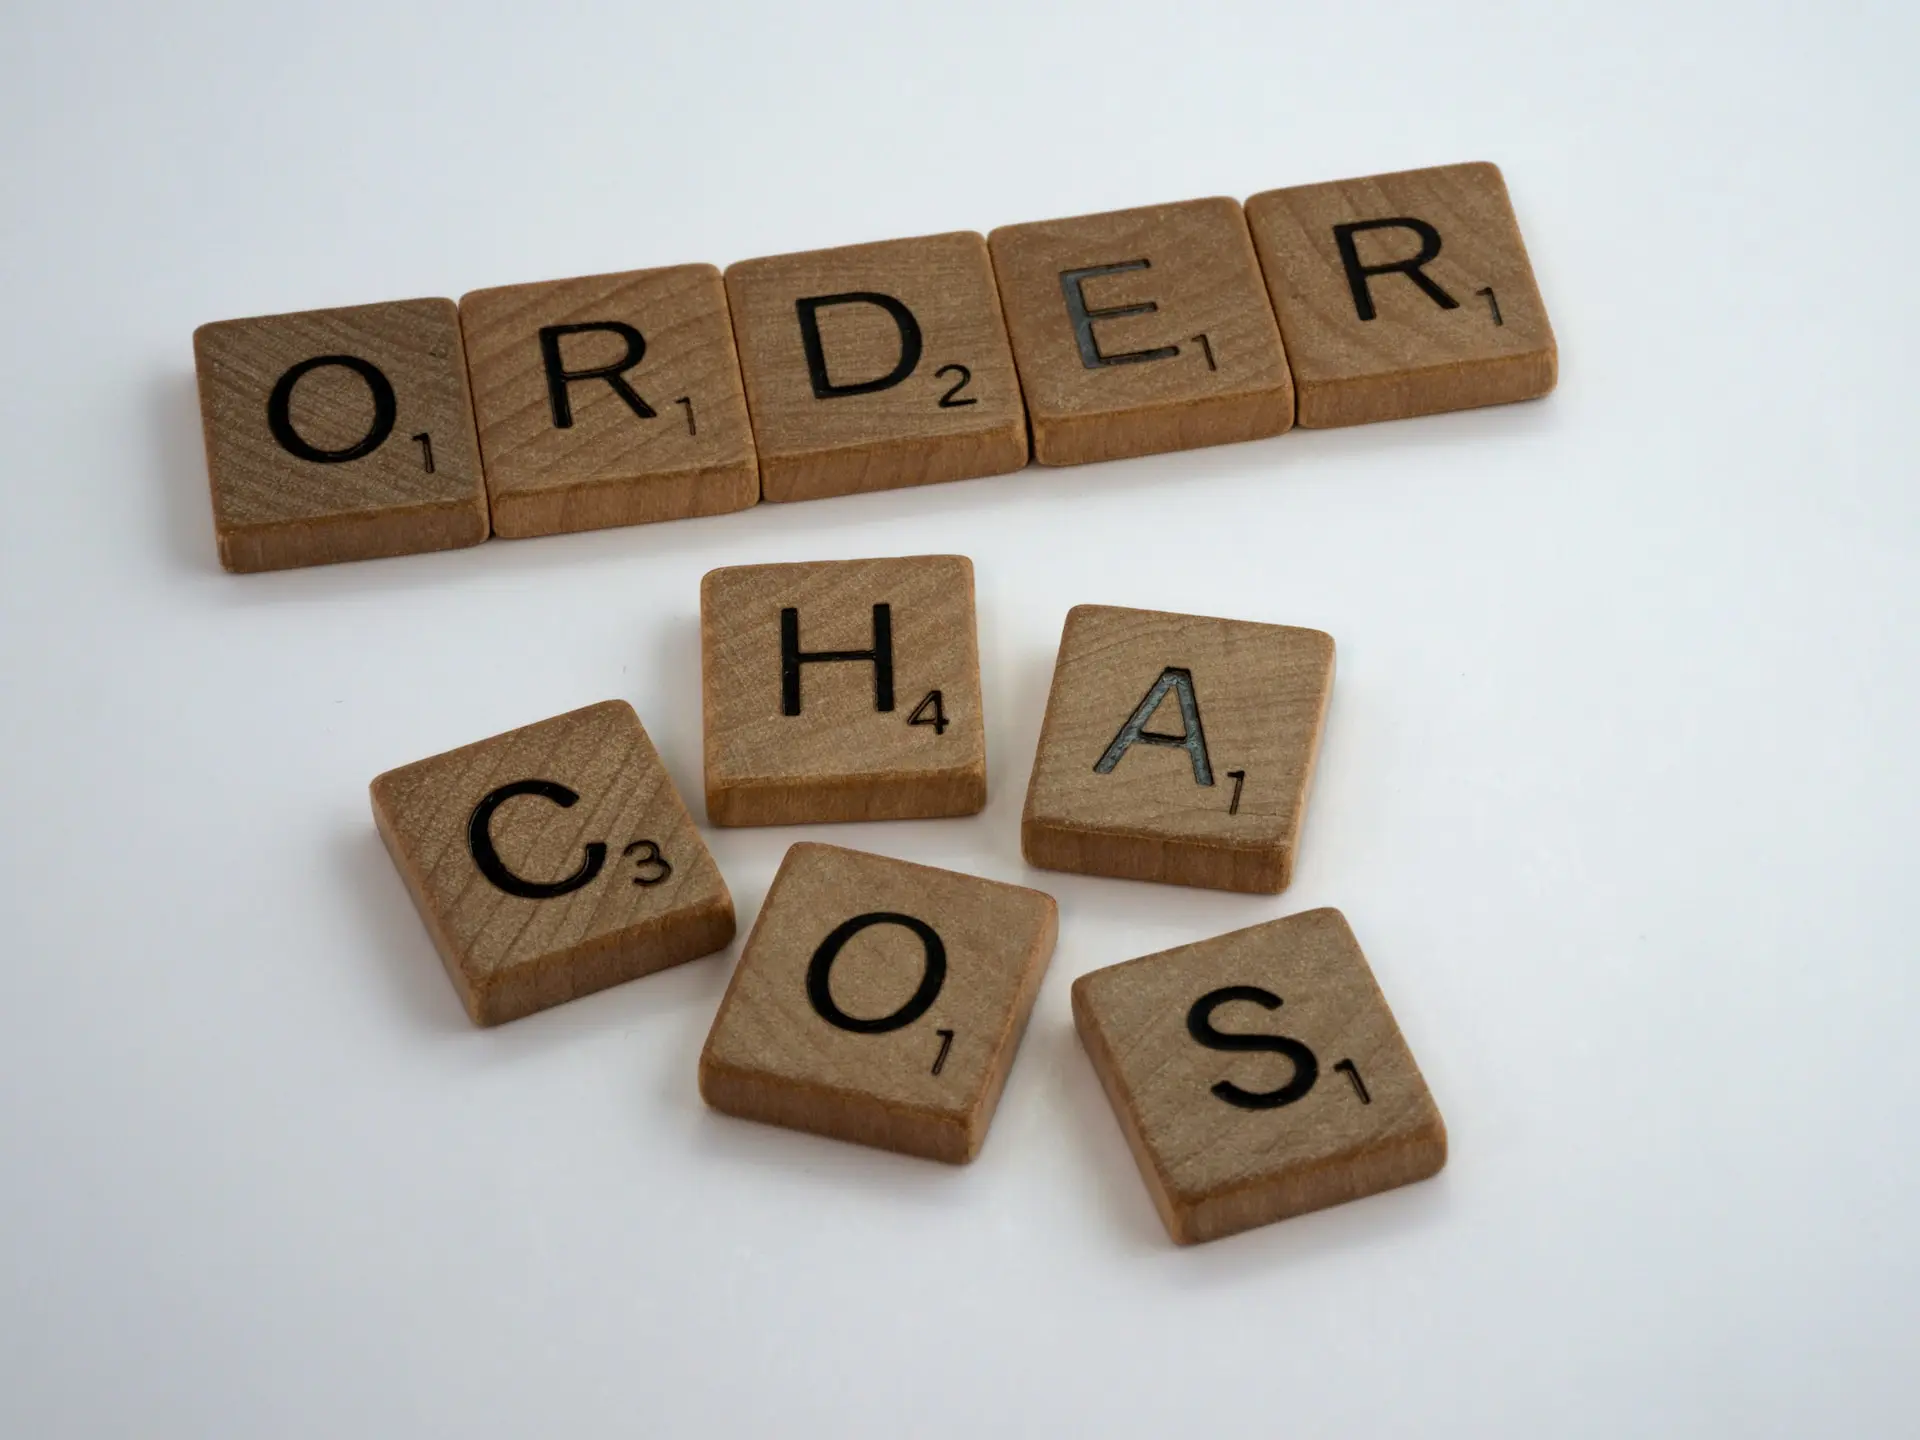 Order and Chaos